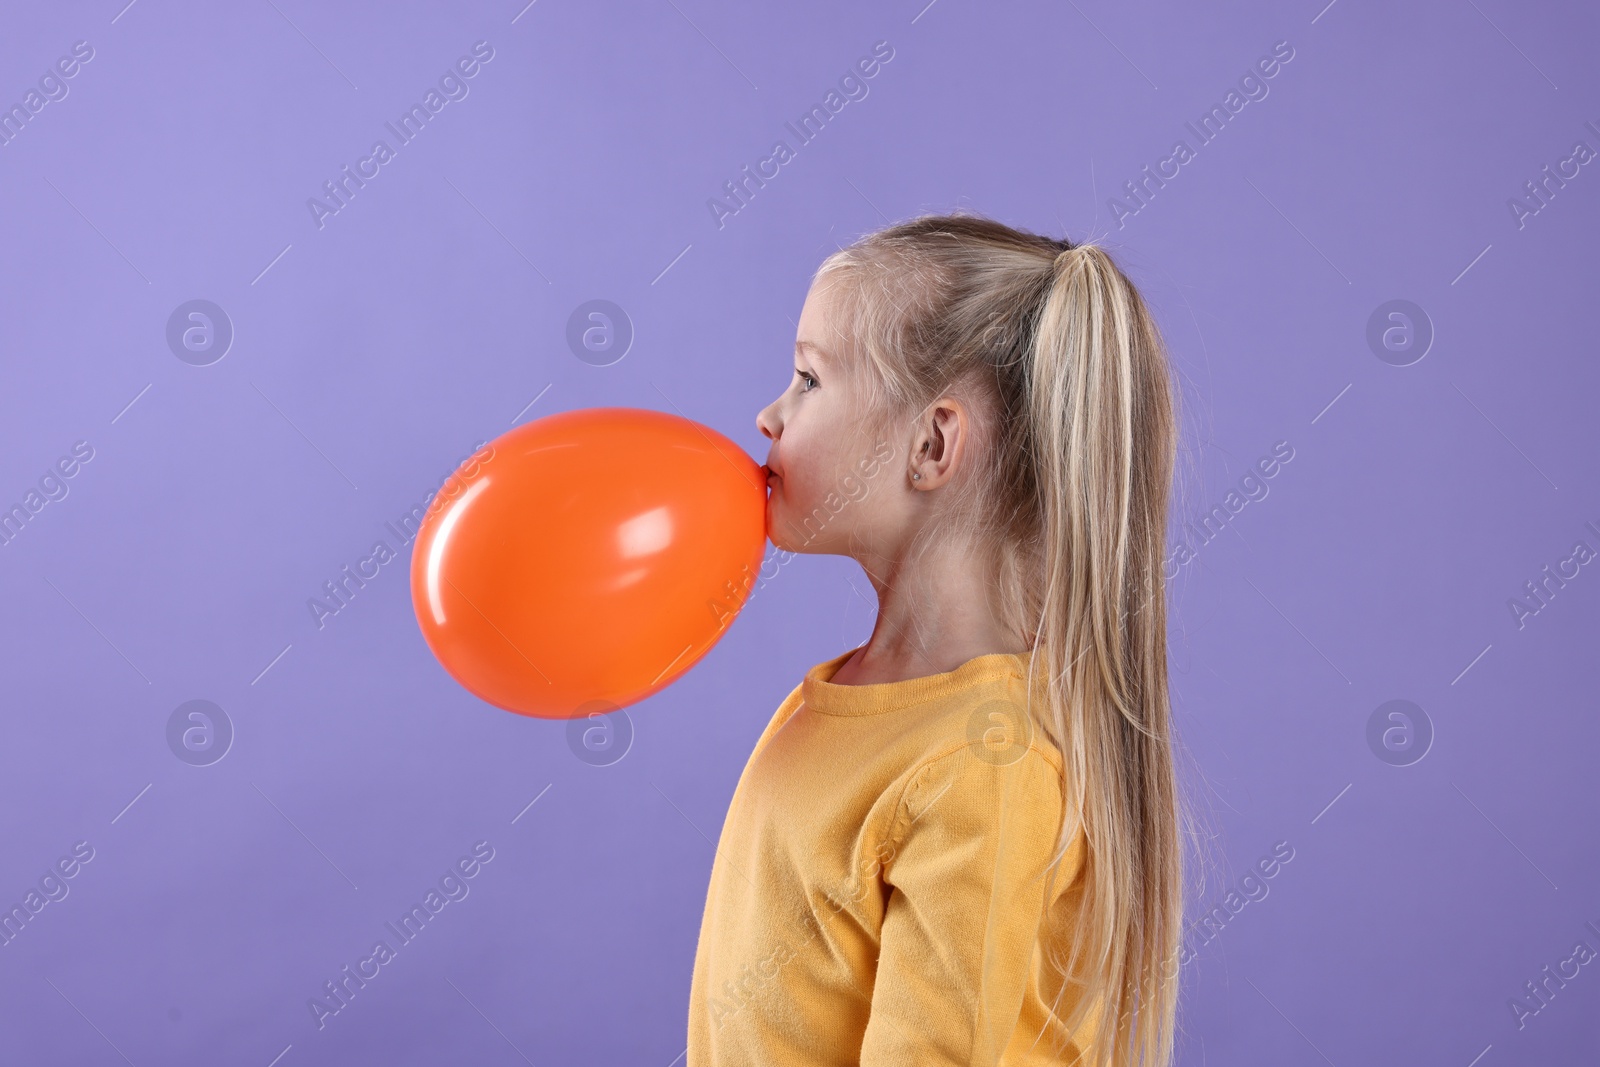 Photo of Cute little girl inflating orange balloon on violet background